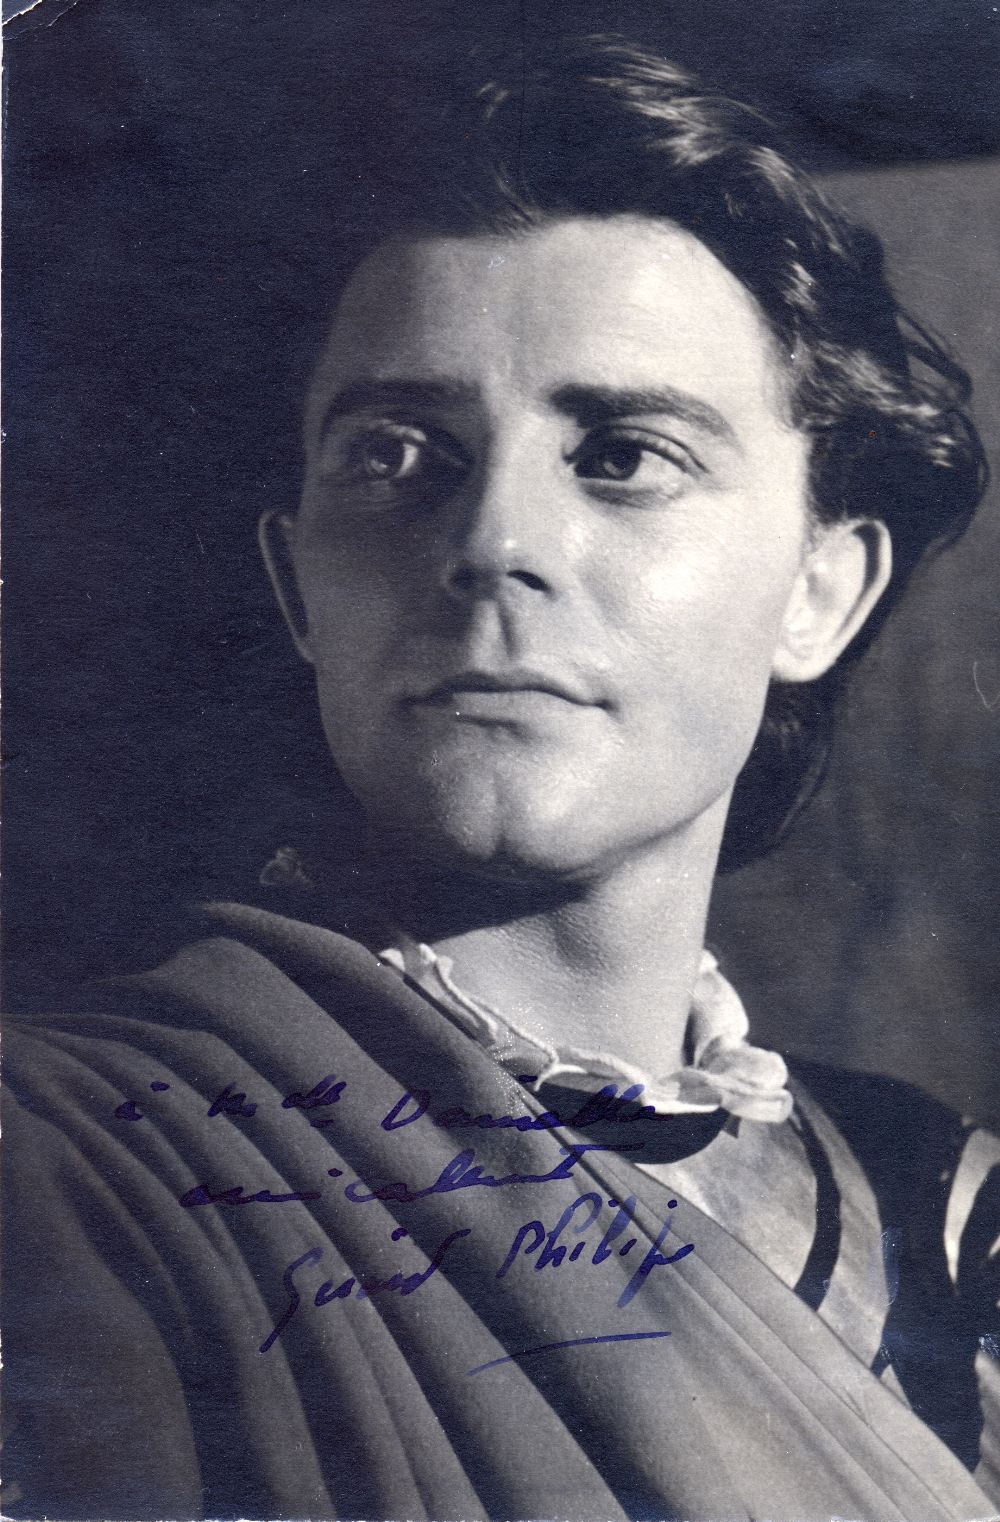 PHILIPE GÃ‰RARD: (1922-1959) French Actor. Vintage signed and inscribed postcard photograph of the